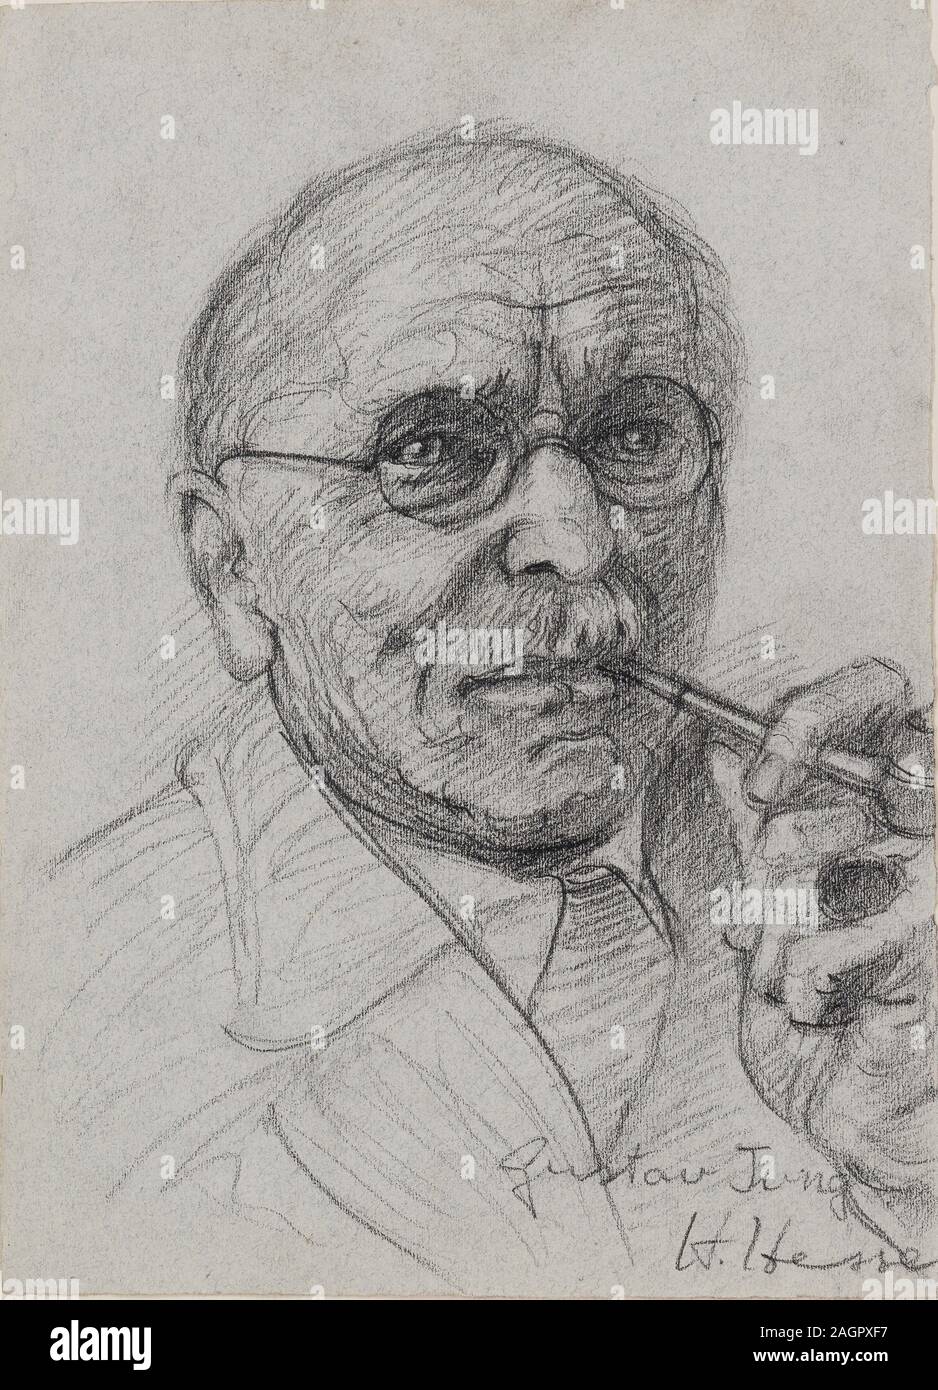 Carl Gustav Jung. Museum: PRIVATE COLLECTION. Author: HERMANN HESSE. Stock Photo